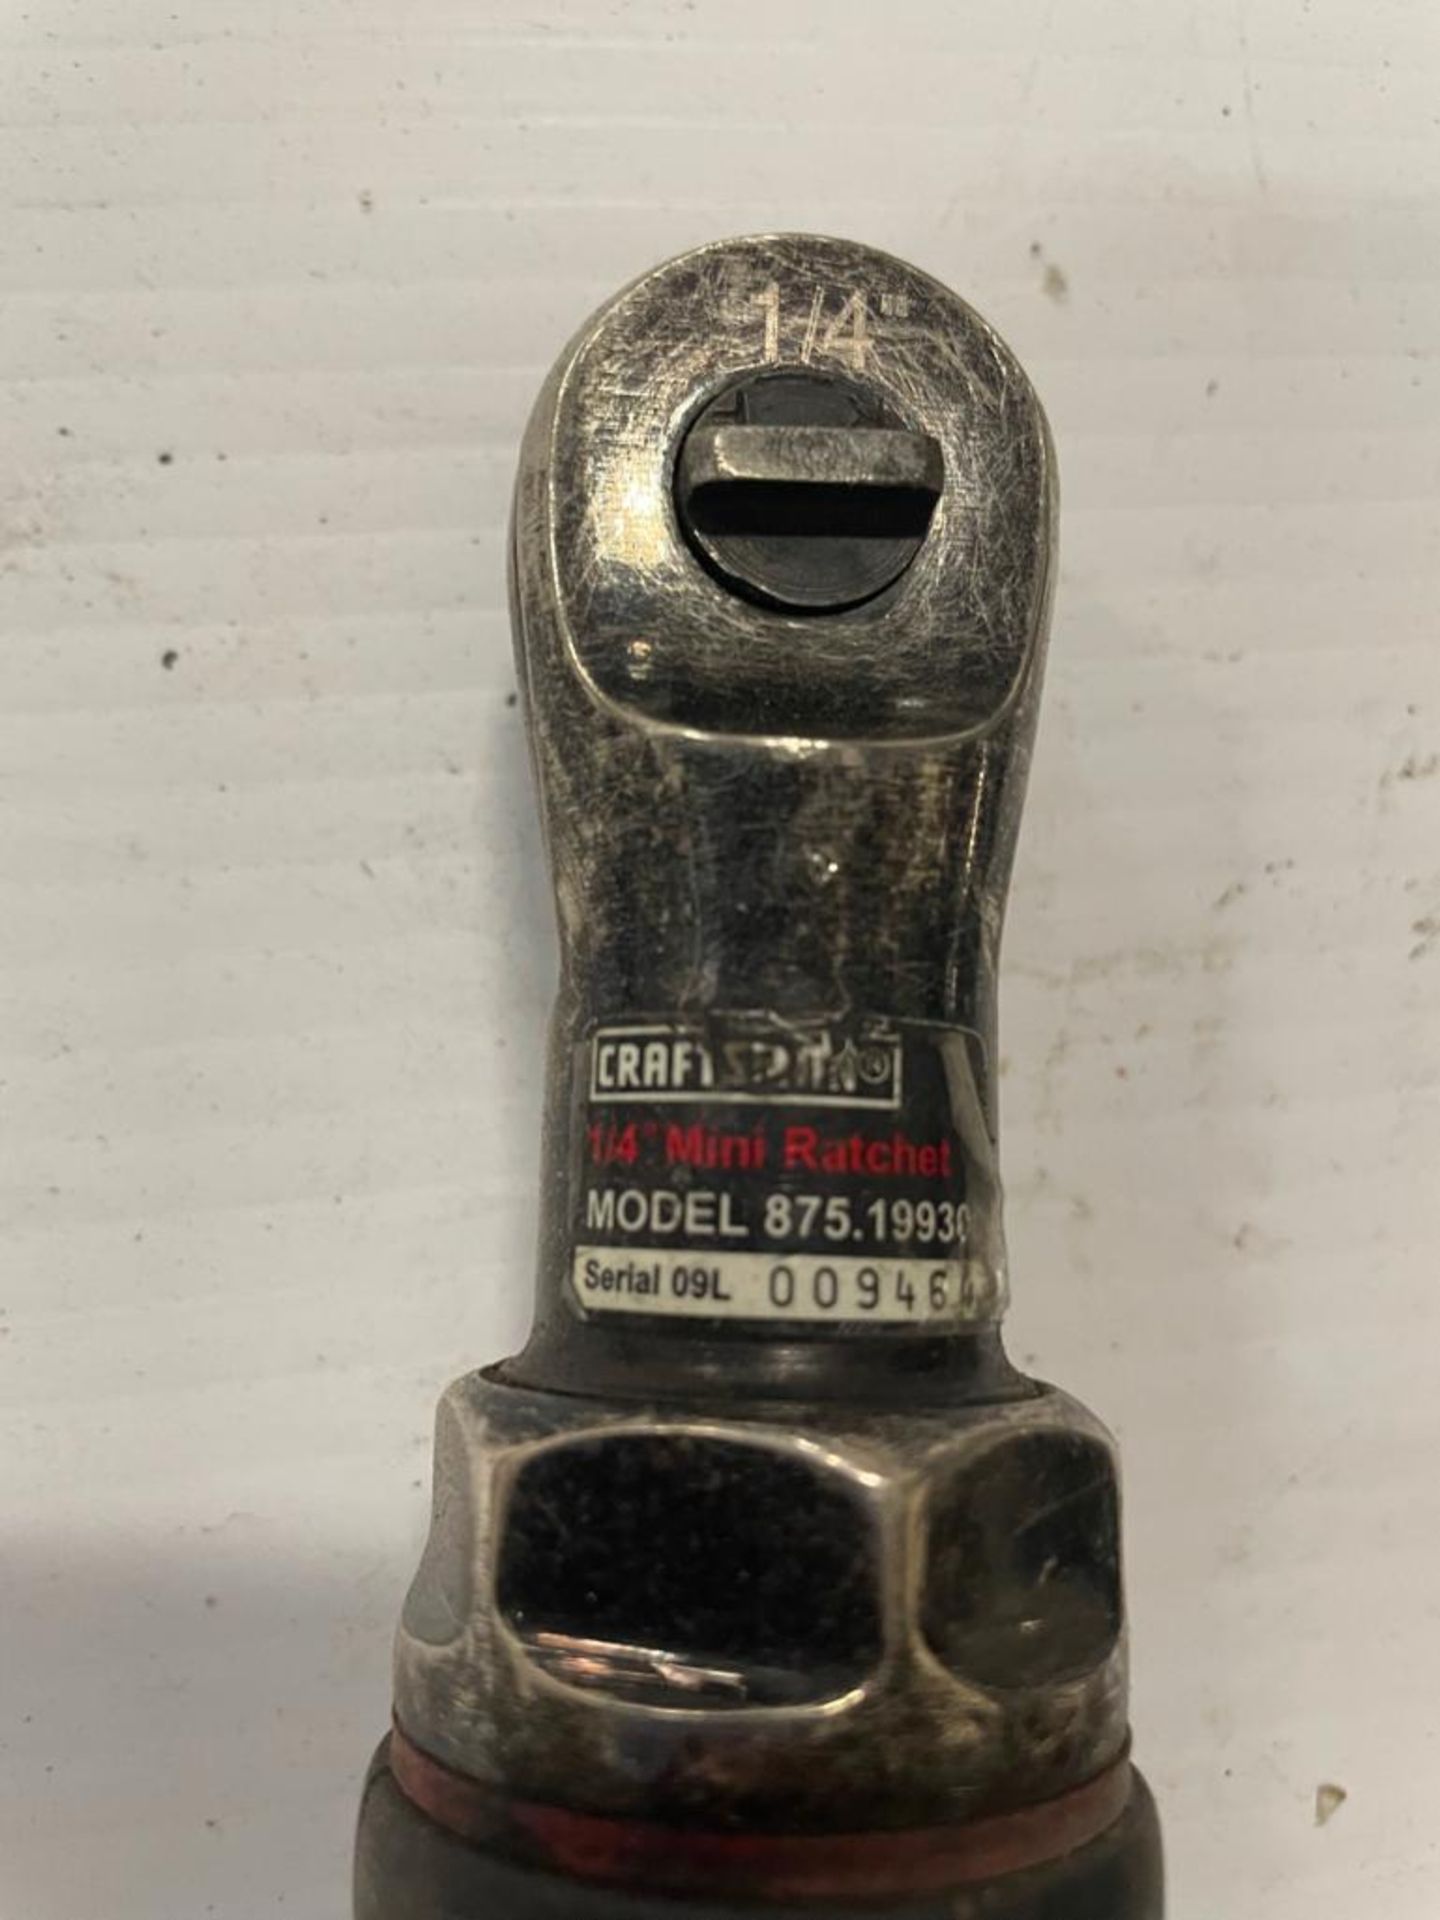 (2) Pneumatic Air Tools Craftsman Mini Ratchet & Far72B Air Ratchet. Located in Hazelwood, MO - Image 10 of 10